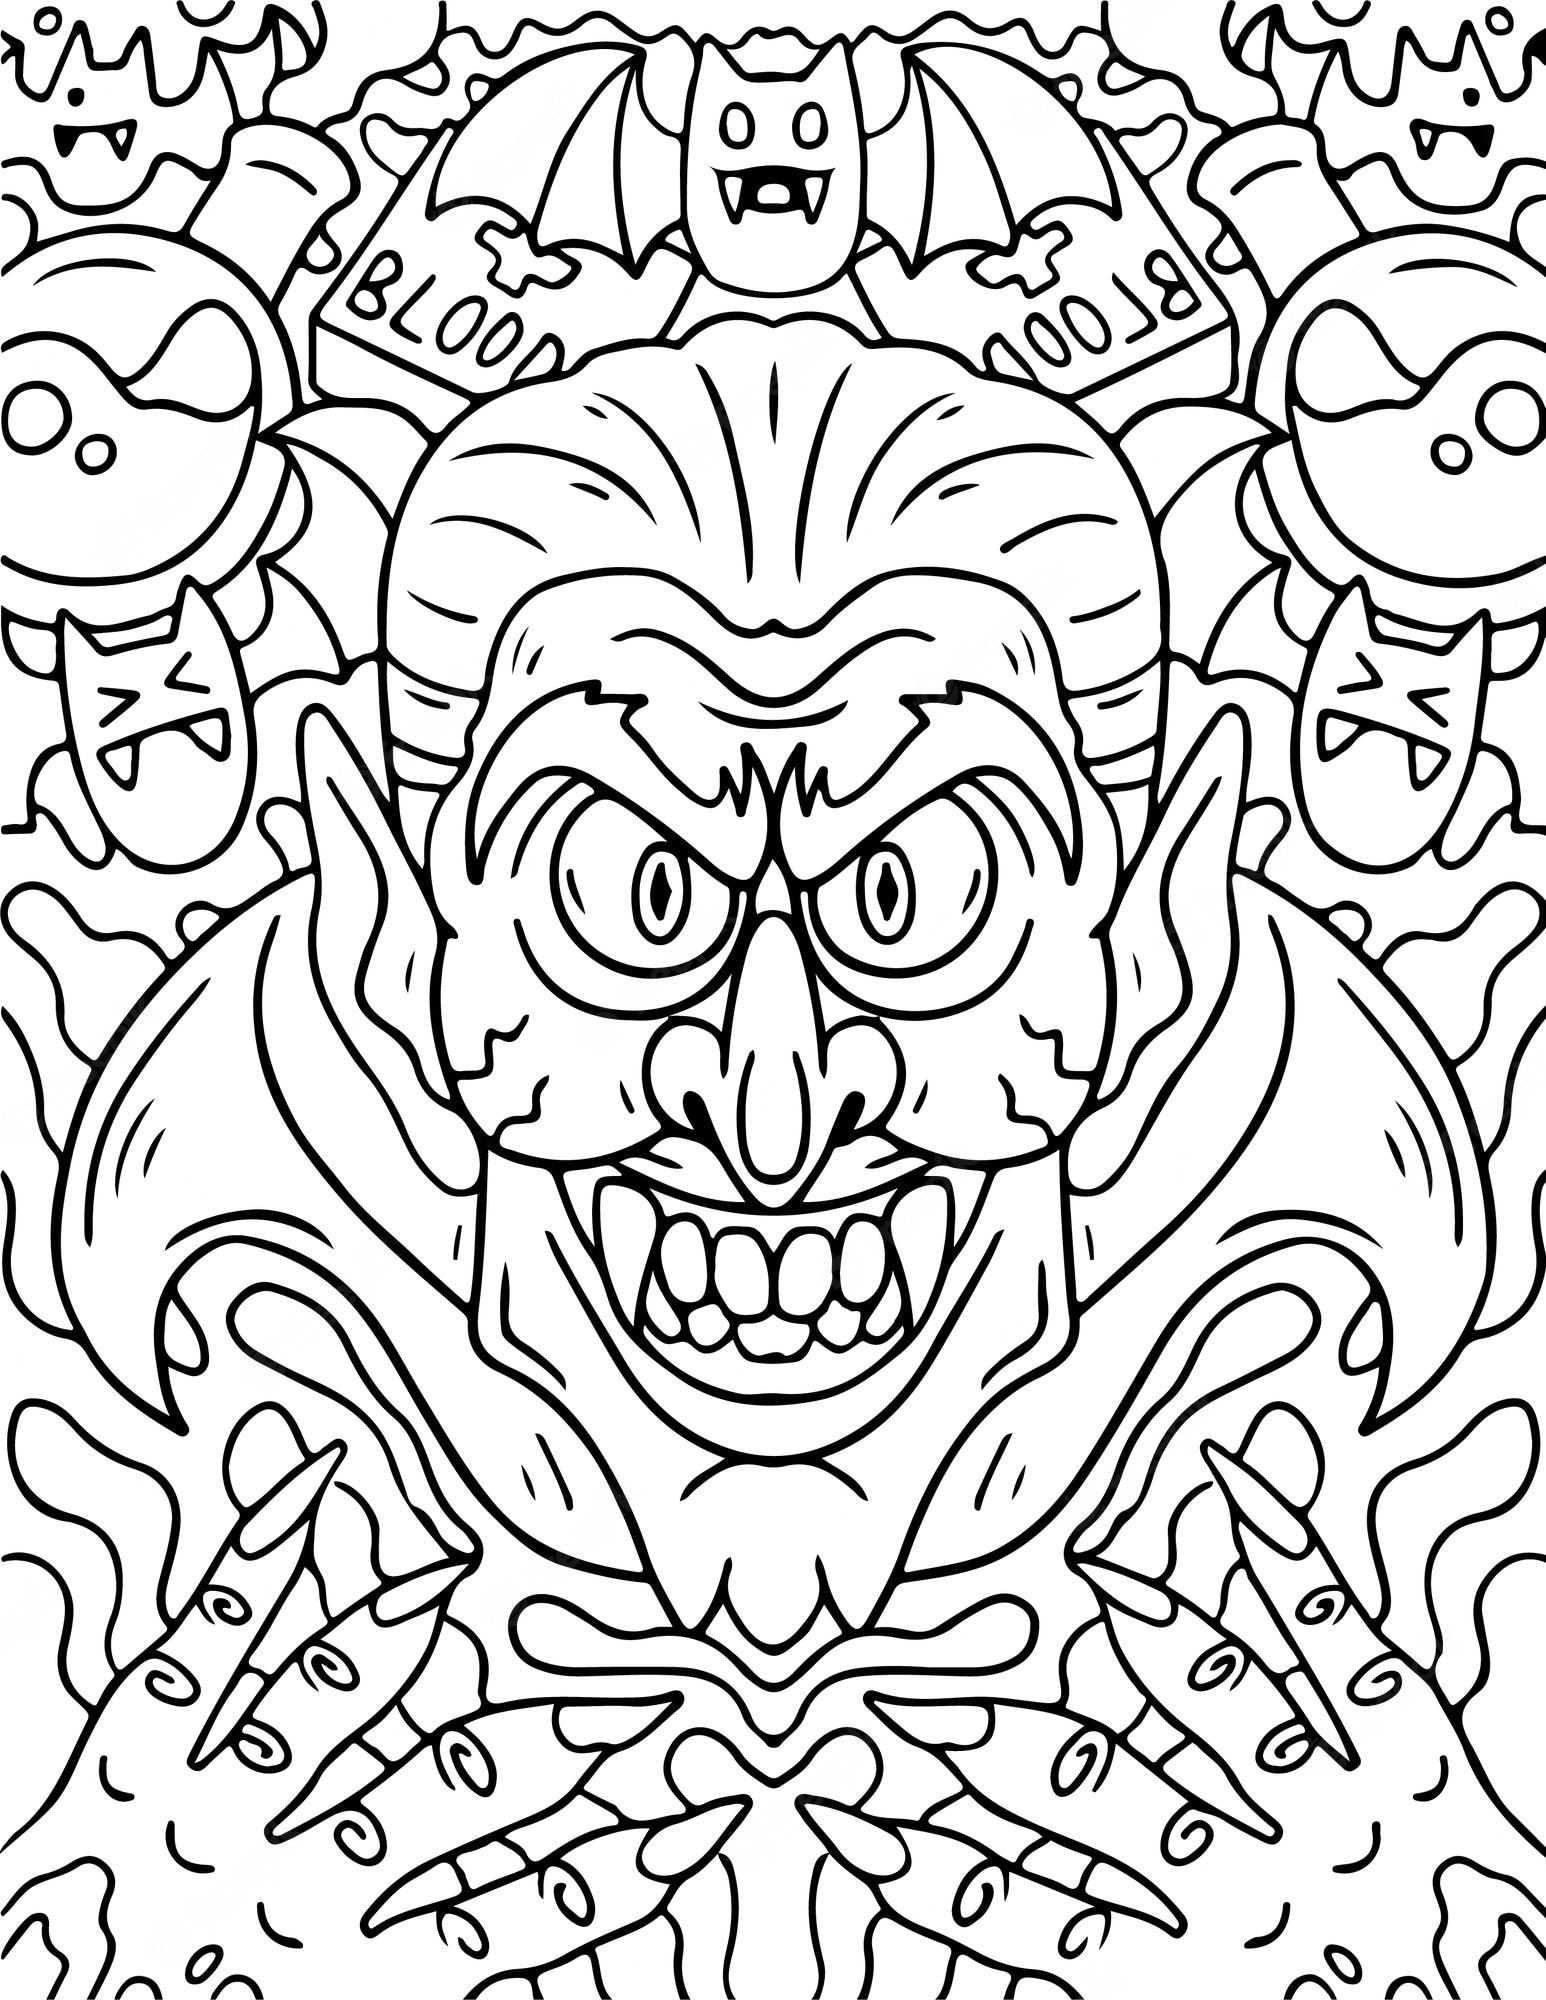 Premium Vector | Vampire face halloween coloring page